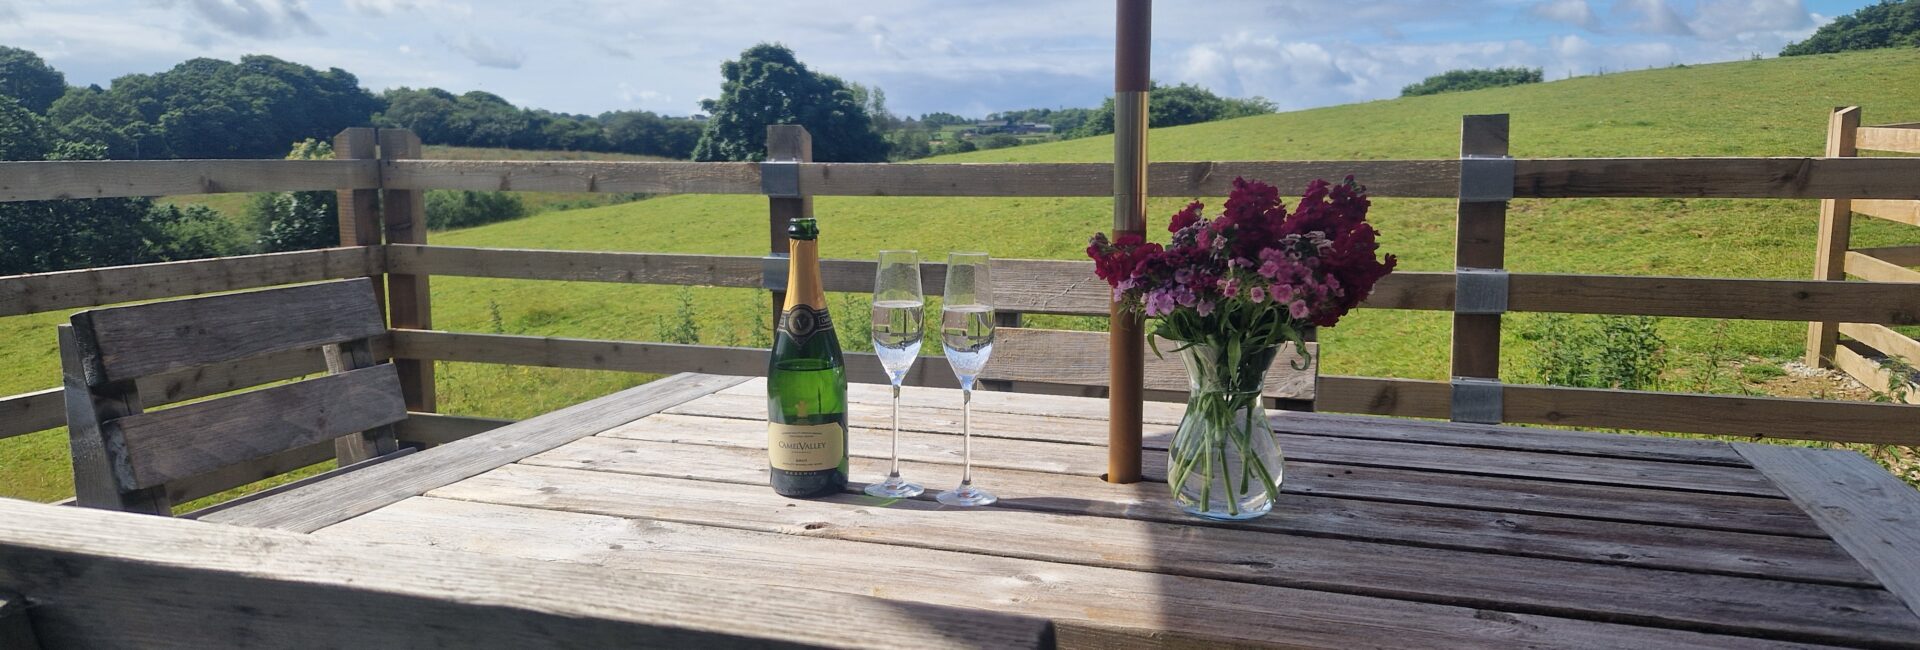 Enjoying a glass of Camel Valley English sparkling wine overlooking the open fields from Buzzard Watch patio.